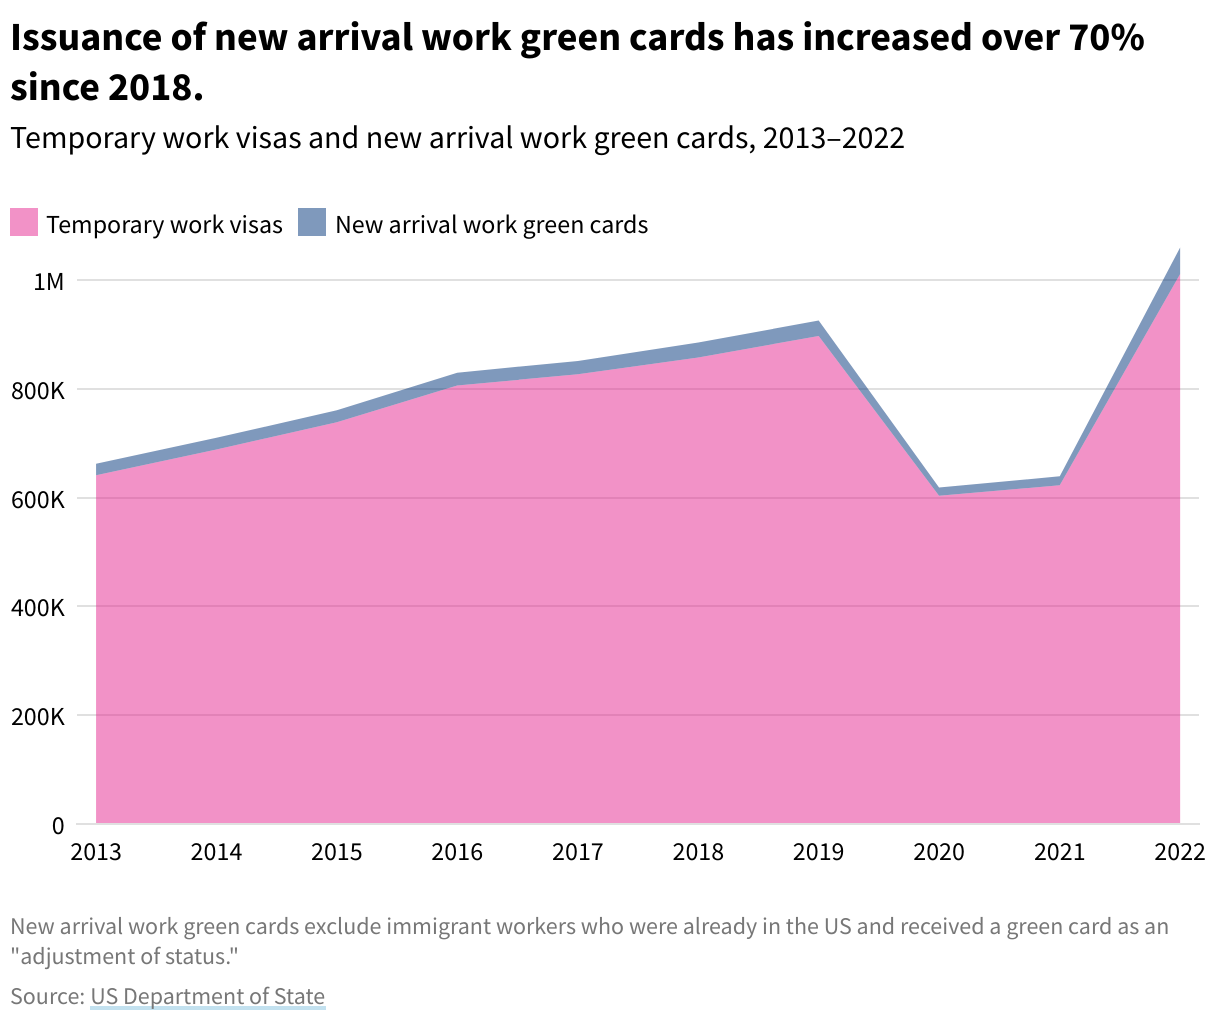 Temporary work visas and new arrival work green cards, 2013–2022. Issuance of new arrival work green cards has increased over 70% since 2018.